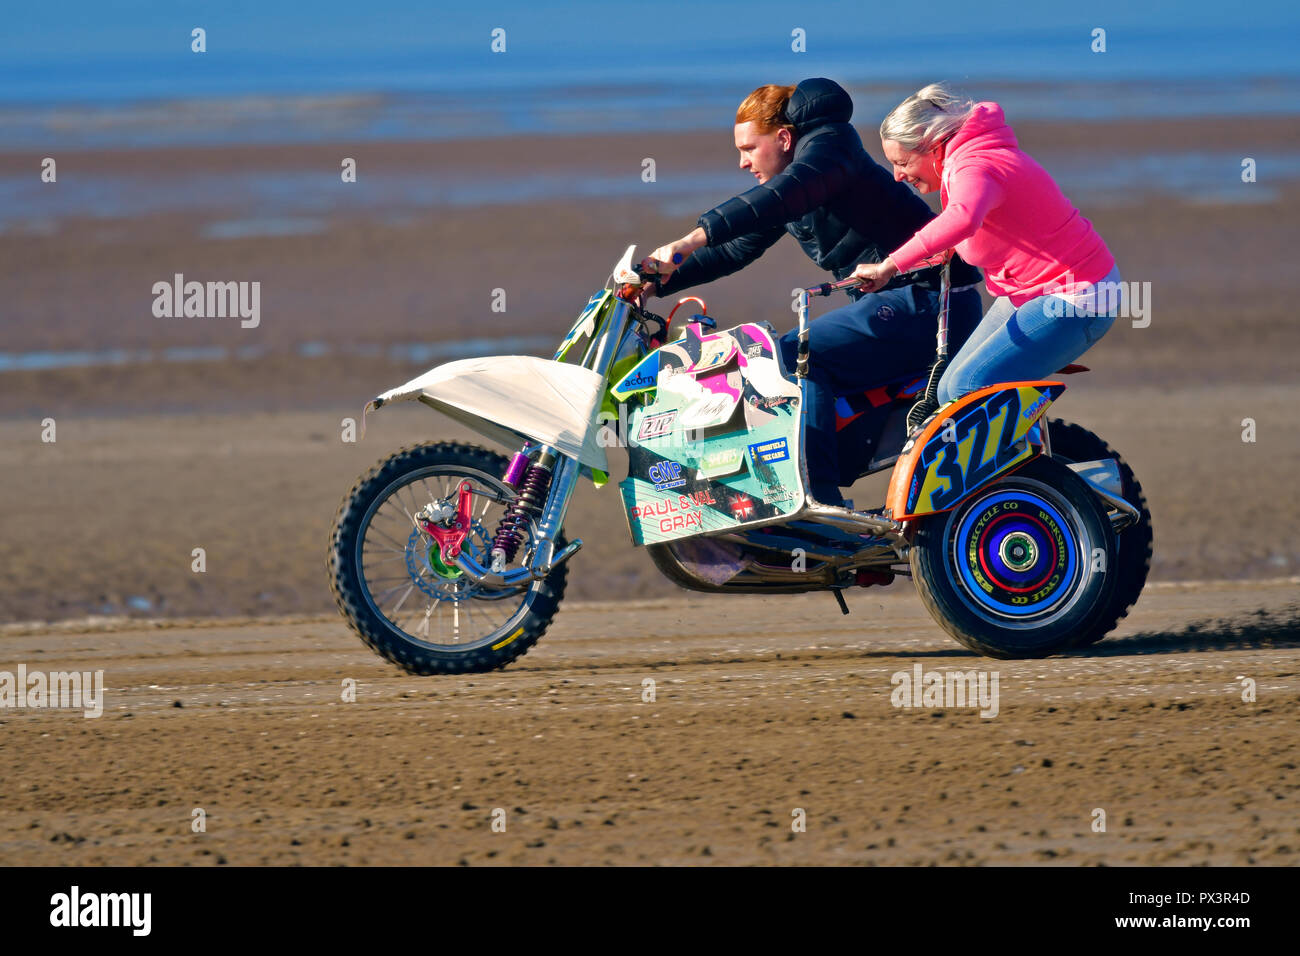 Weston Super Mare, UK. 19th Oct 2018. Getting ready for the Annual weekend bike race on the sands at Weston Super Mare in the UK. Robert Timoney/Alamy/Live/News Stock Photo